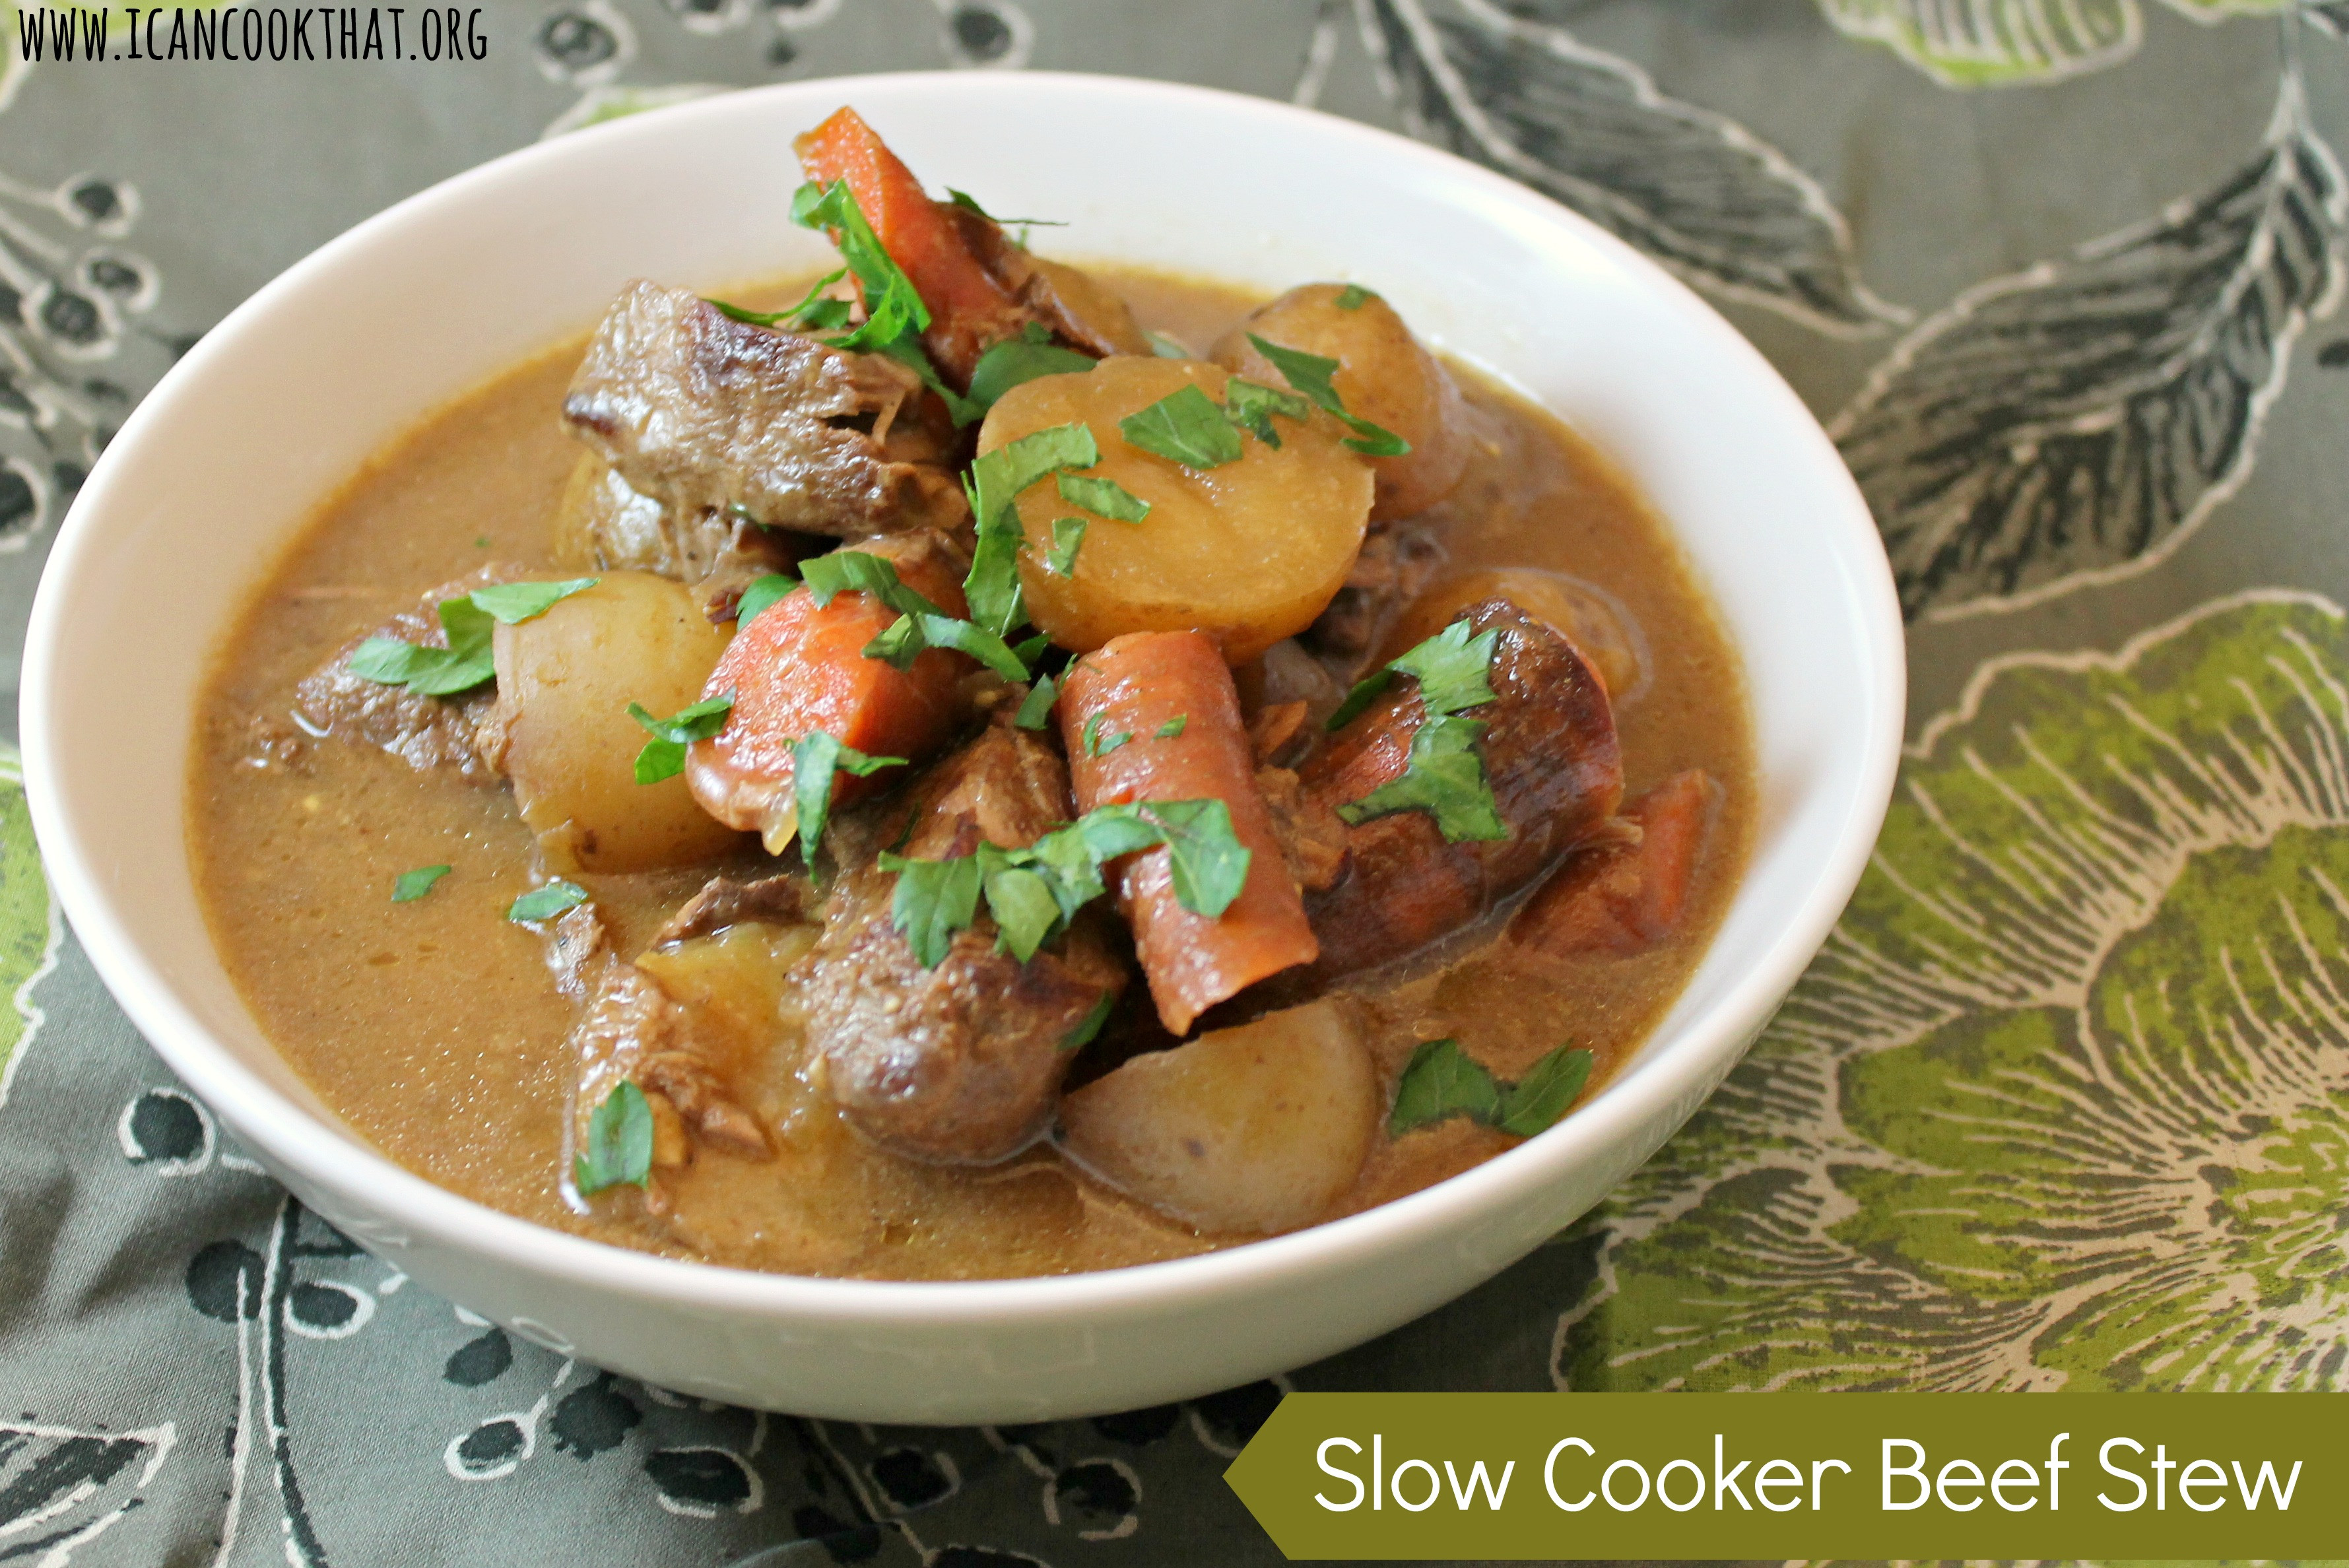 Slow Cooker Stew Recipes
 Slow Cooker Beef Stew Recipe